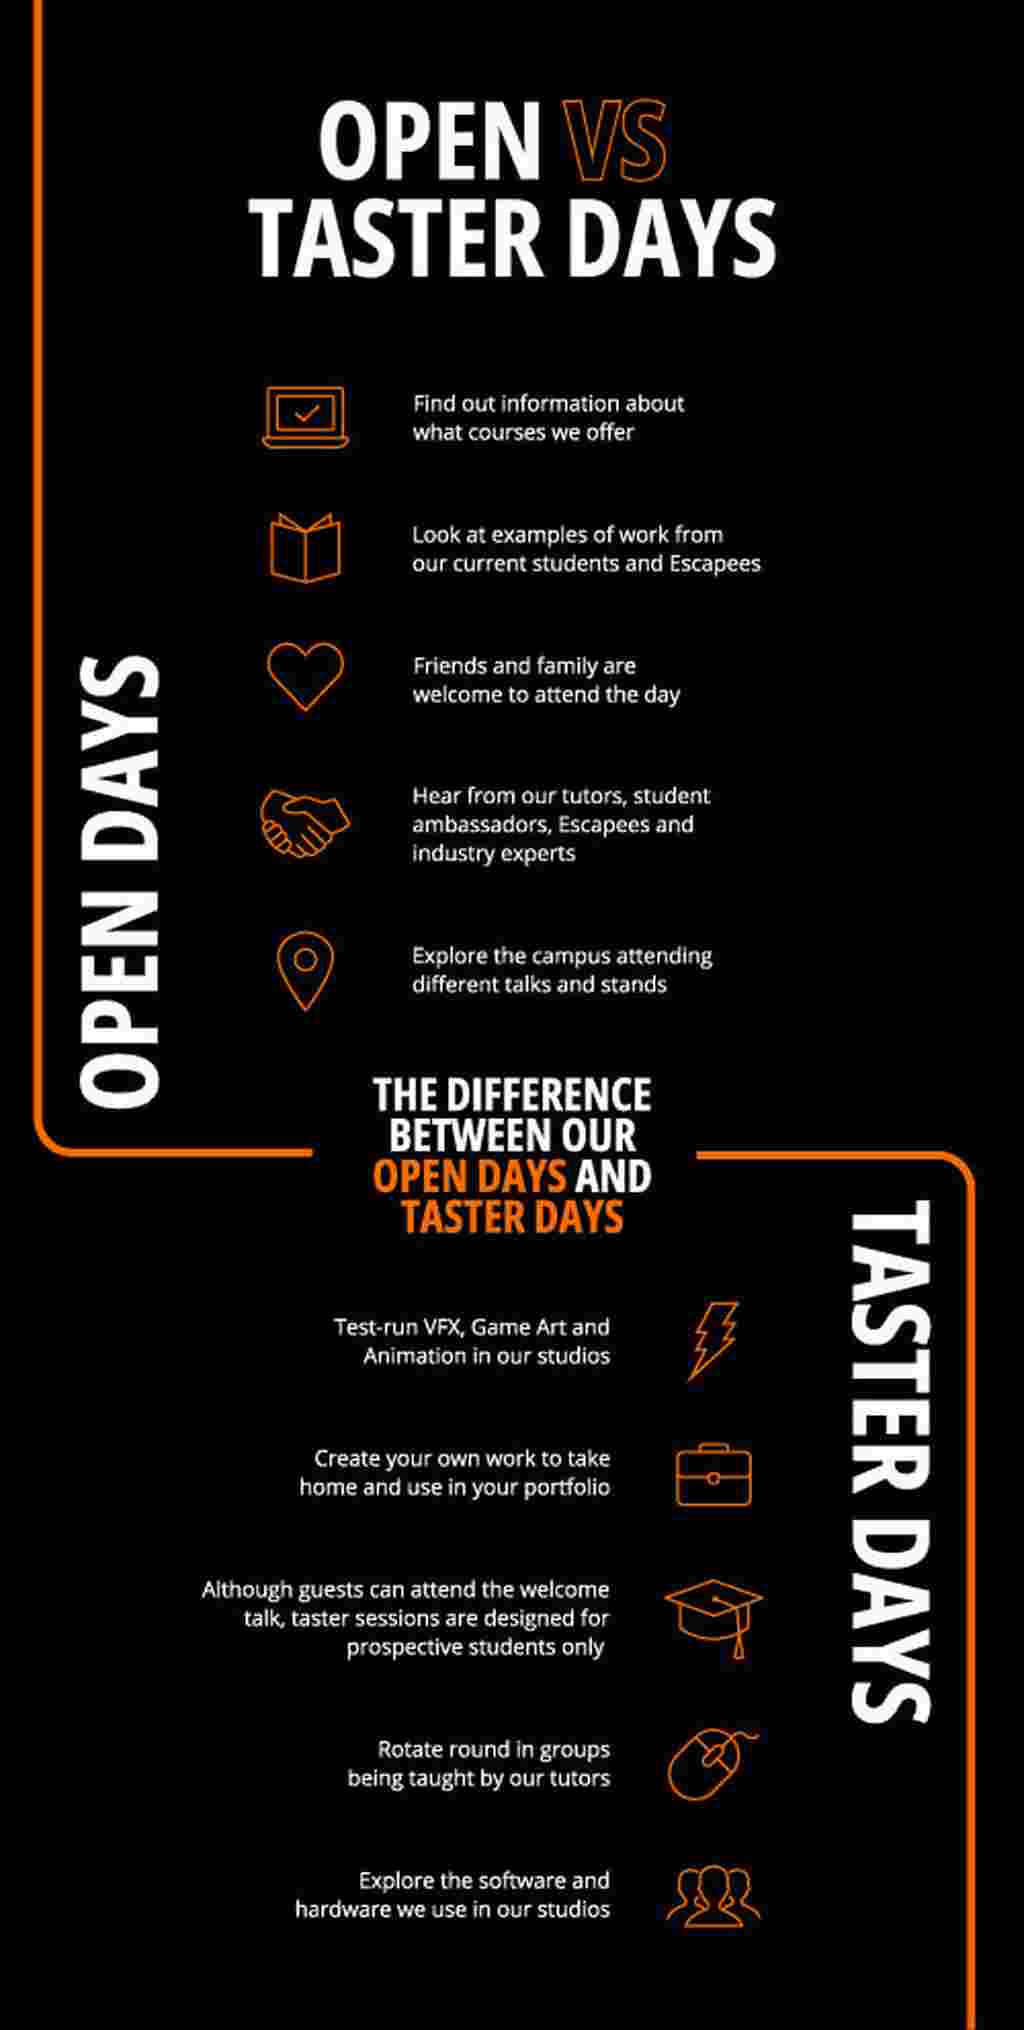 Infographic explaining the differences between open days vs taster days